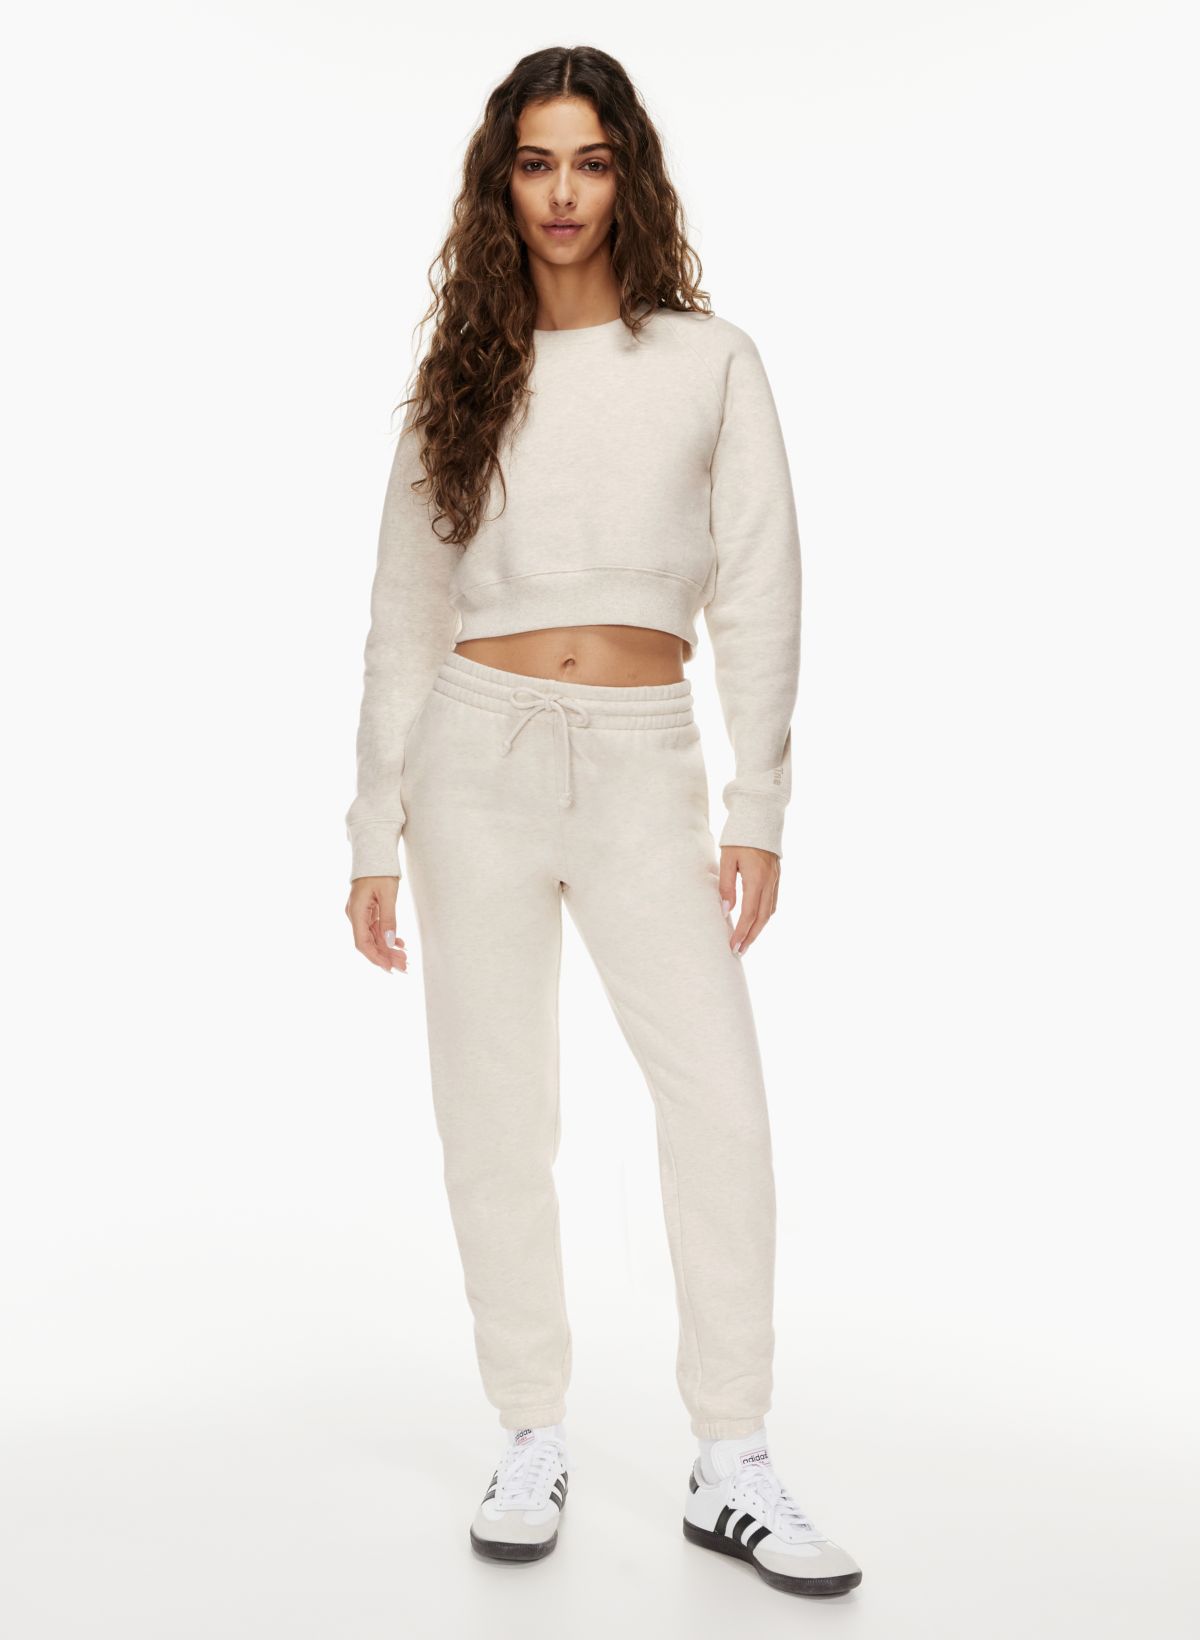 16 Trendy Sweatpants That Combine Style and Comfort